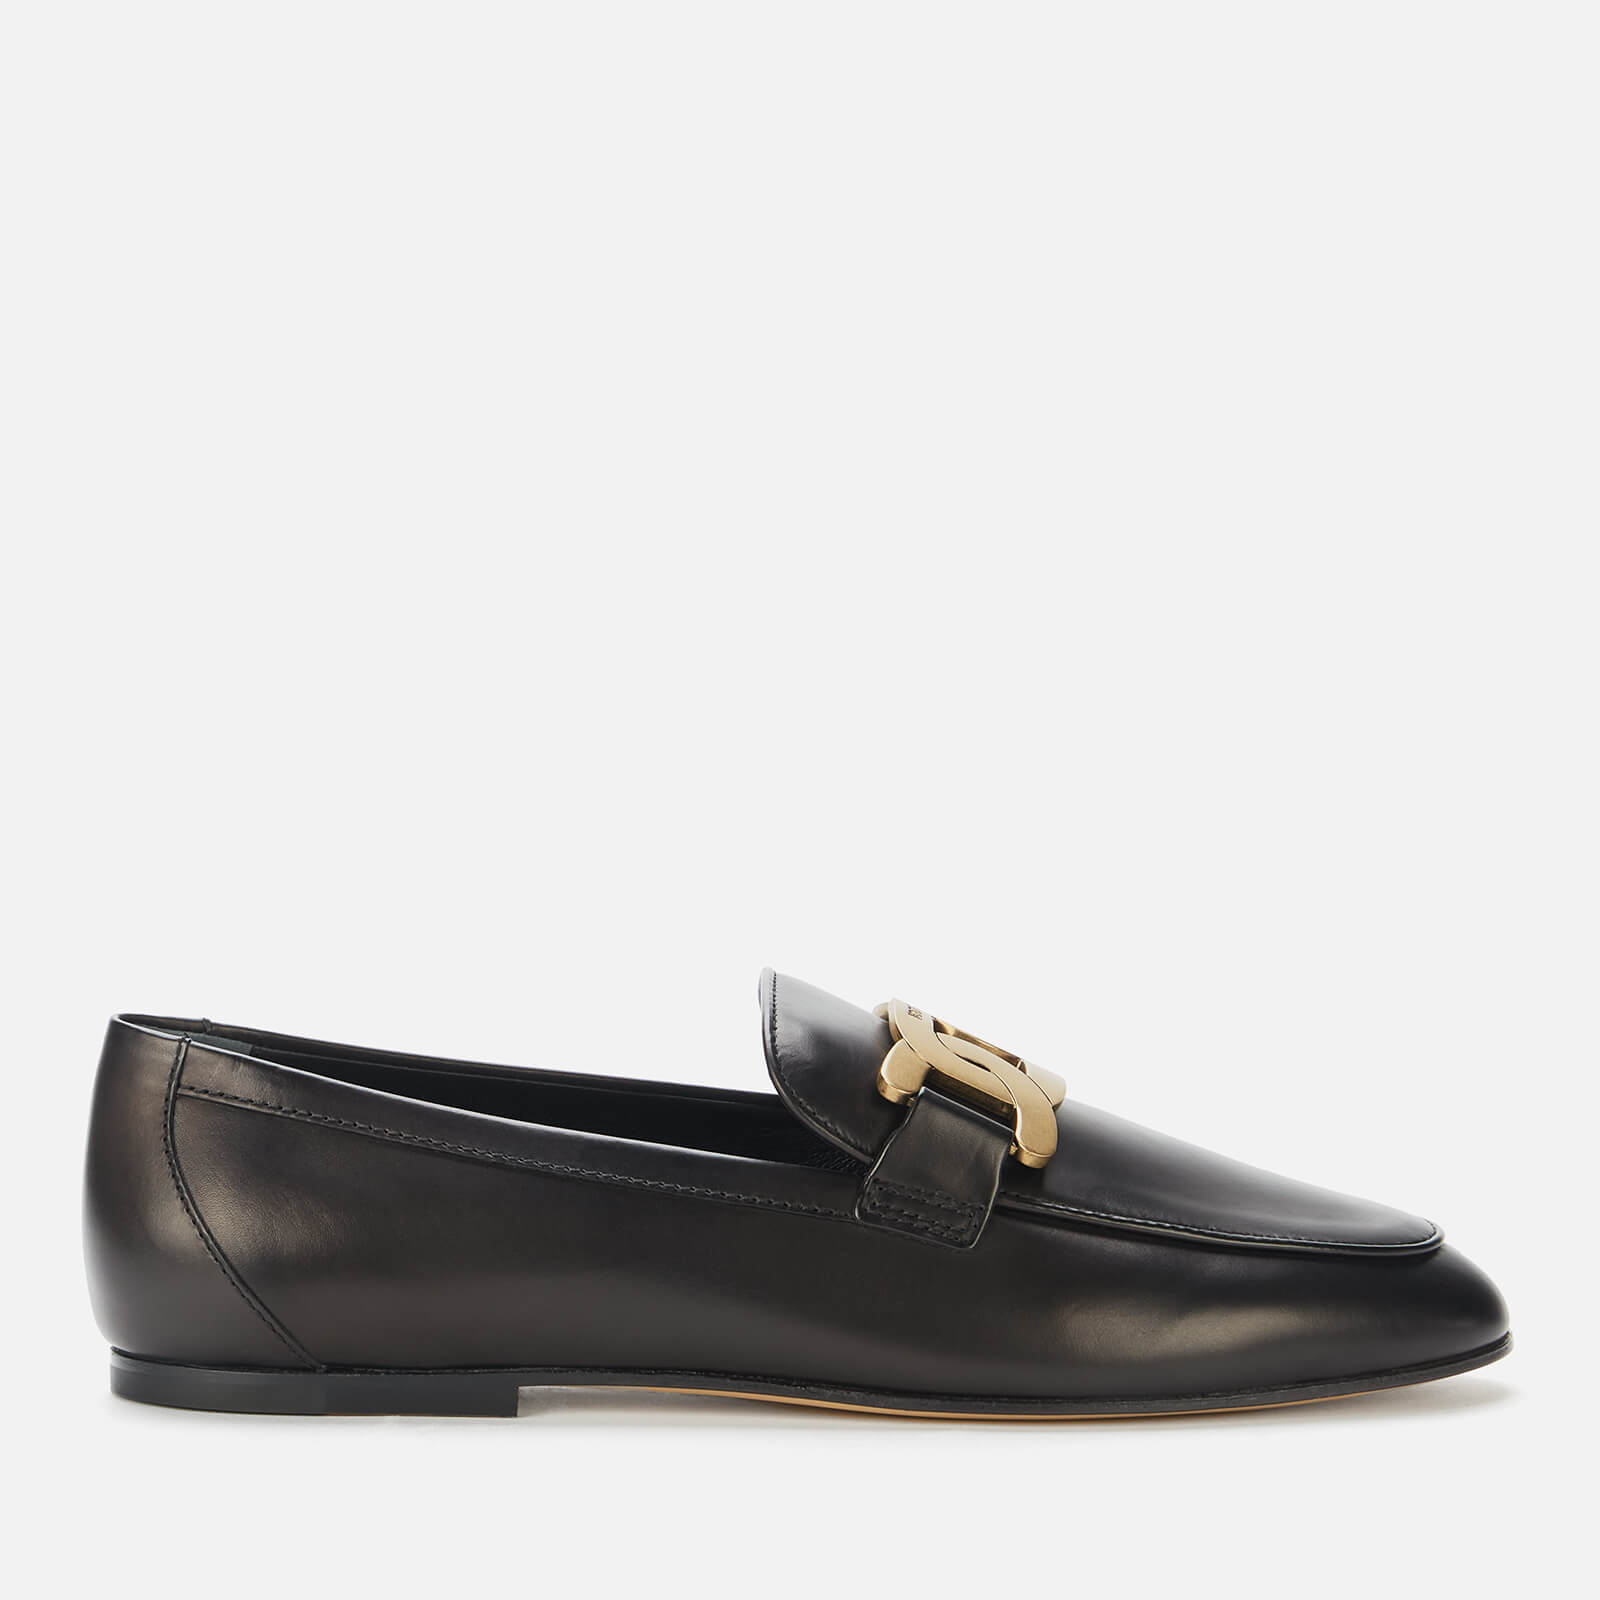 Tod's Women's Kate Leather Loafers - Black - UK 7